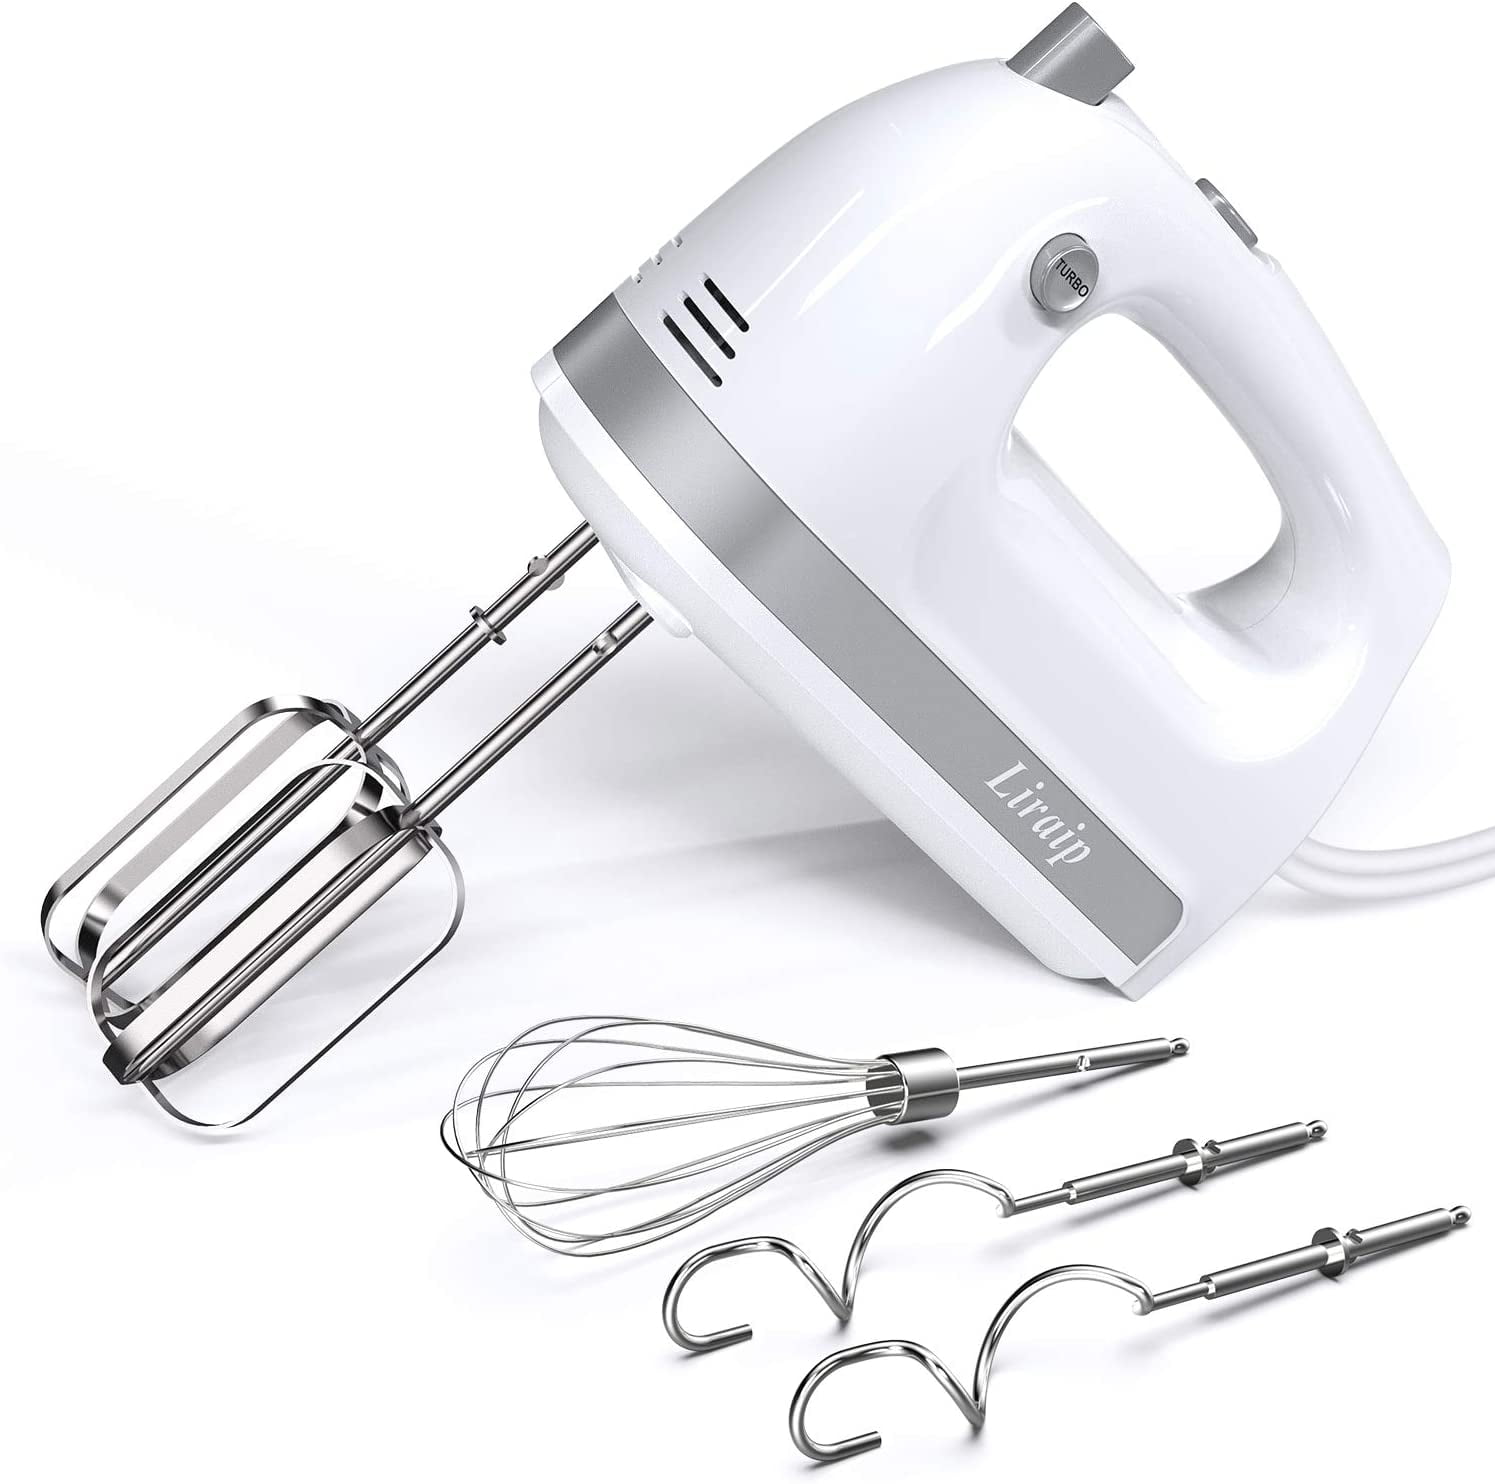 7-Speed Hand Mixer Electric with Mixer Electric Beaters and 4 Stainless Steel Accessories for Whipping Mixing Cookies Cakes Hand Mixer Electric Brownies Dough Batters